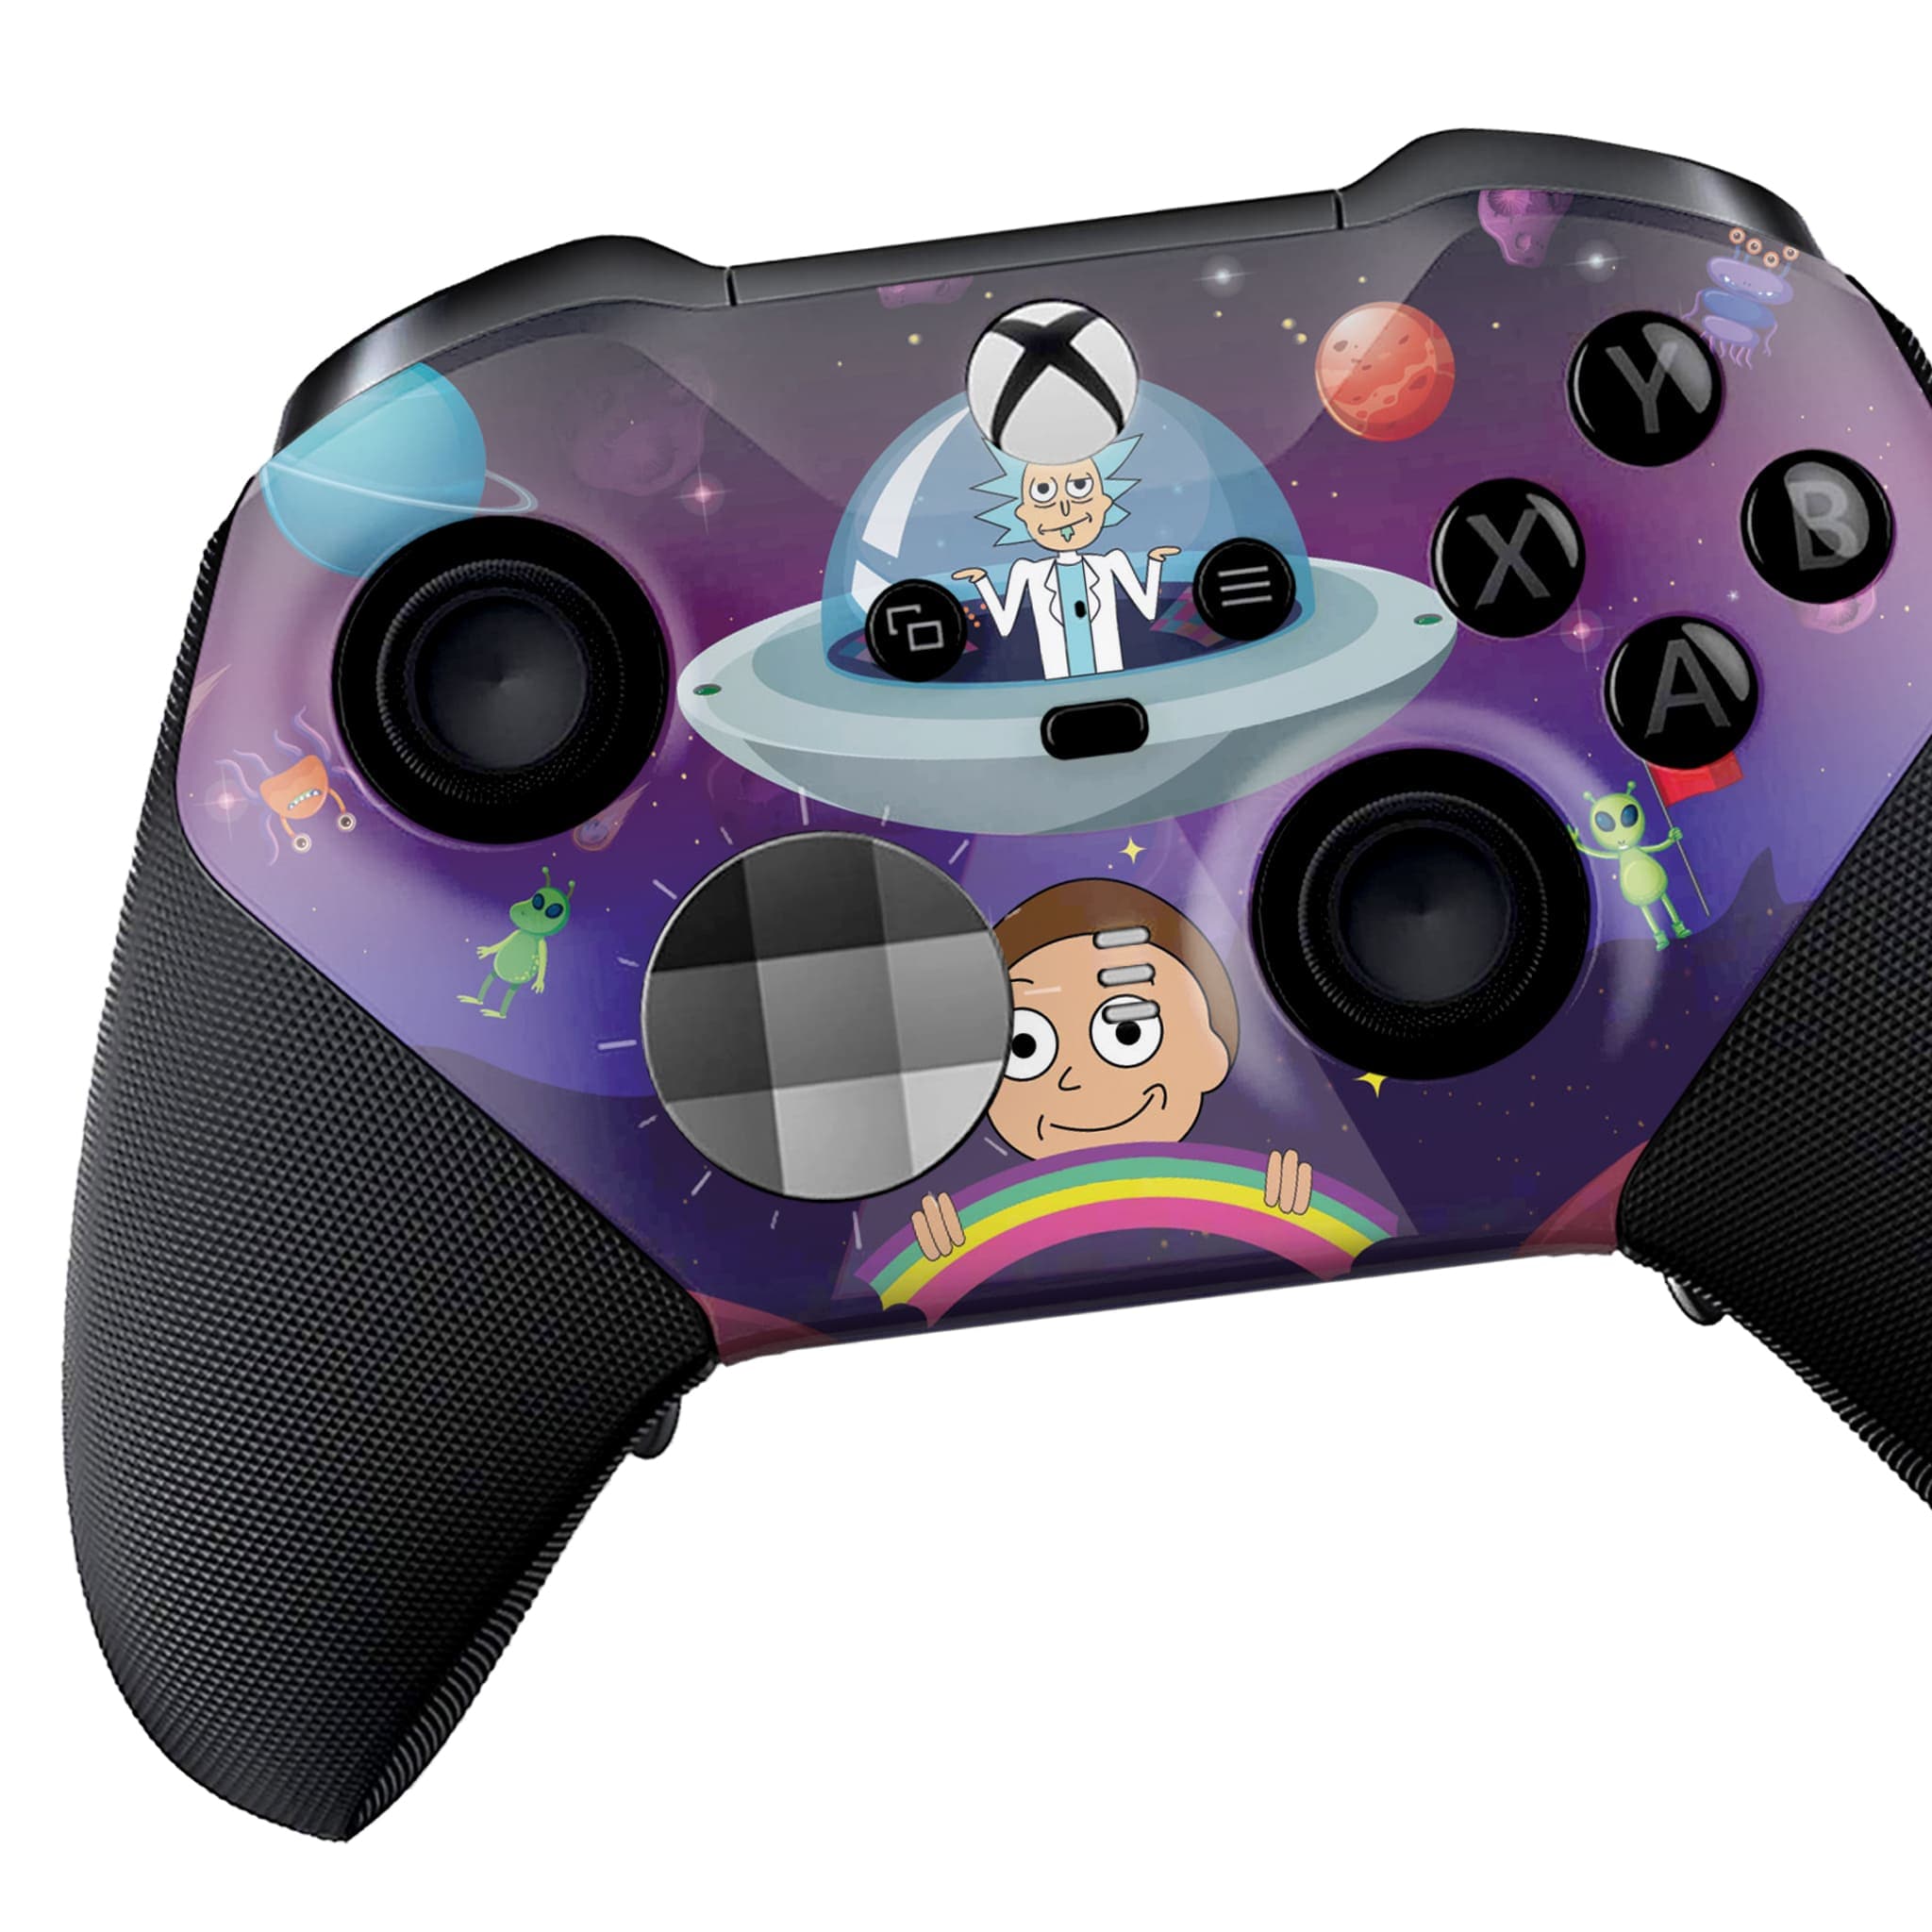 Rick & Morty in Space Xbox Elite Series 2 Controller - Dream Controller